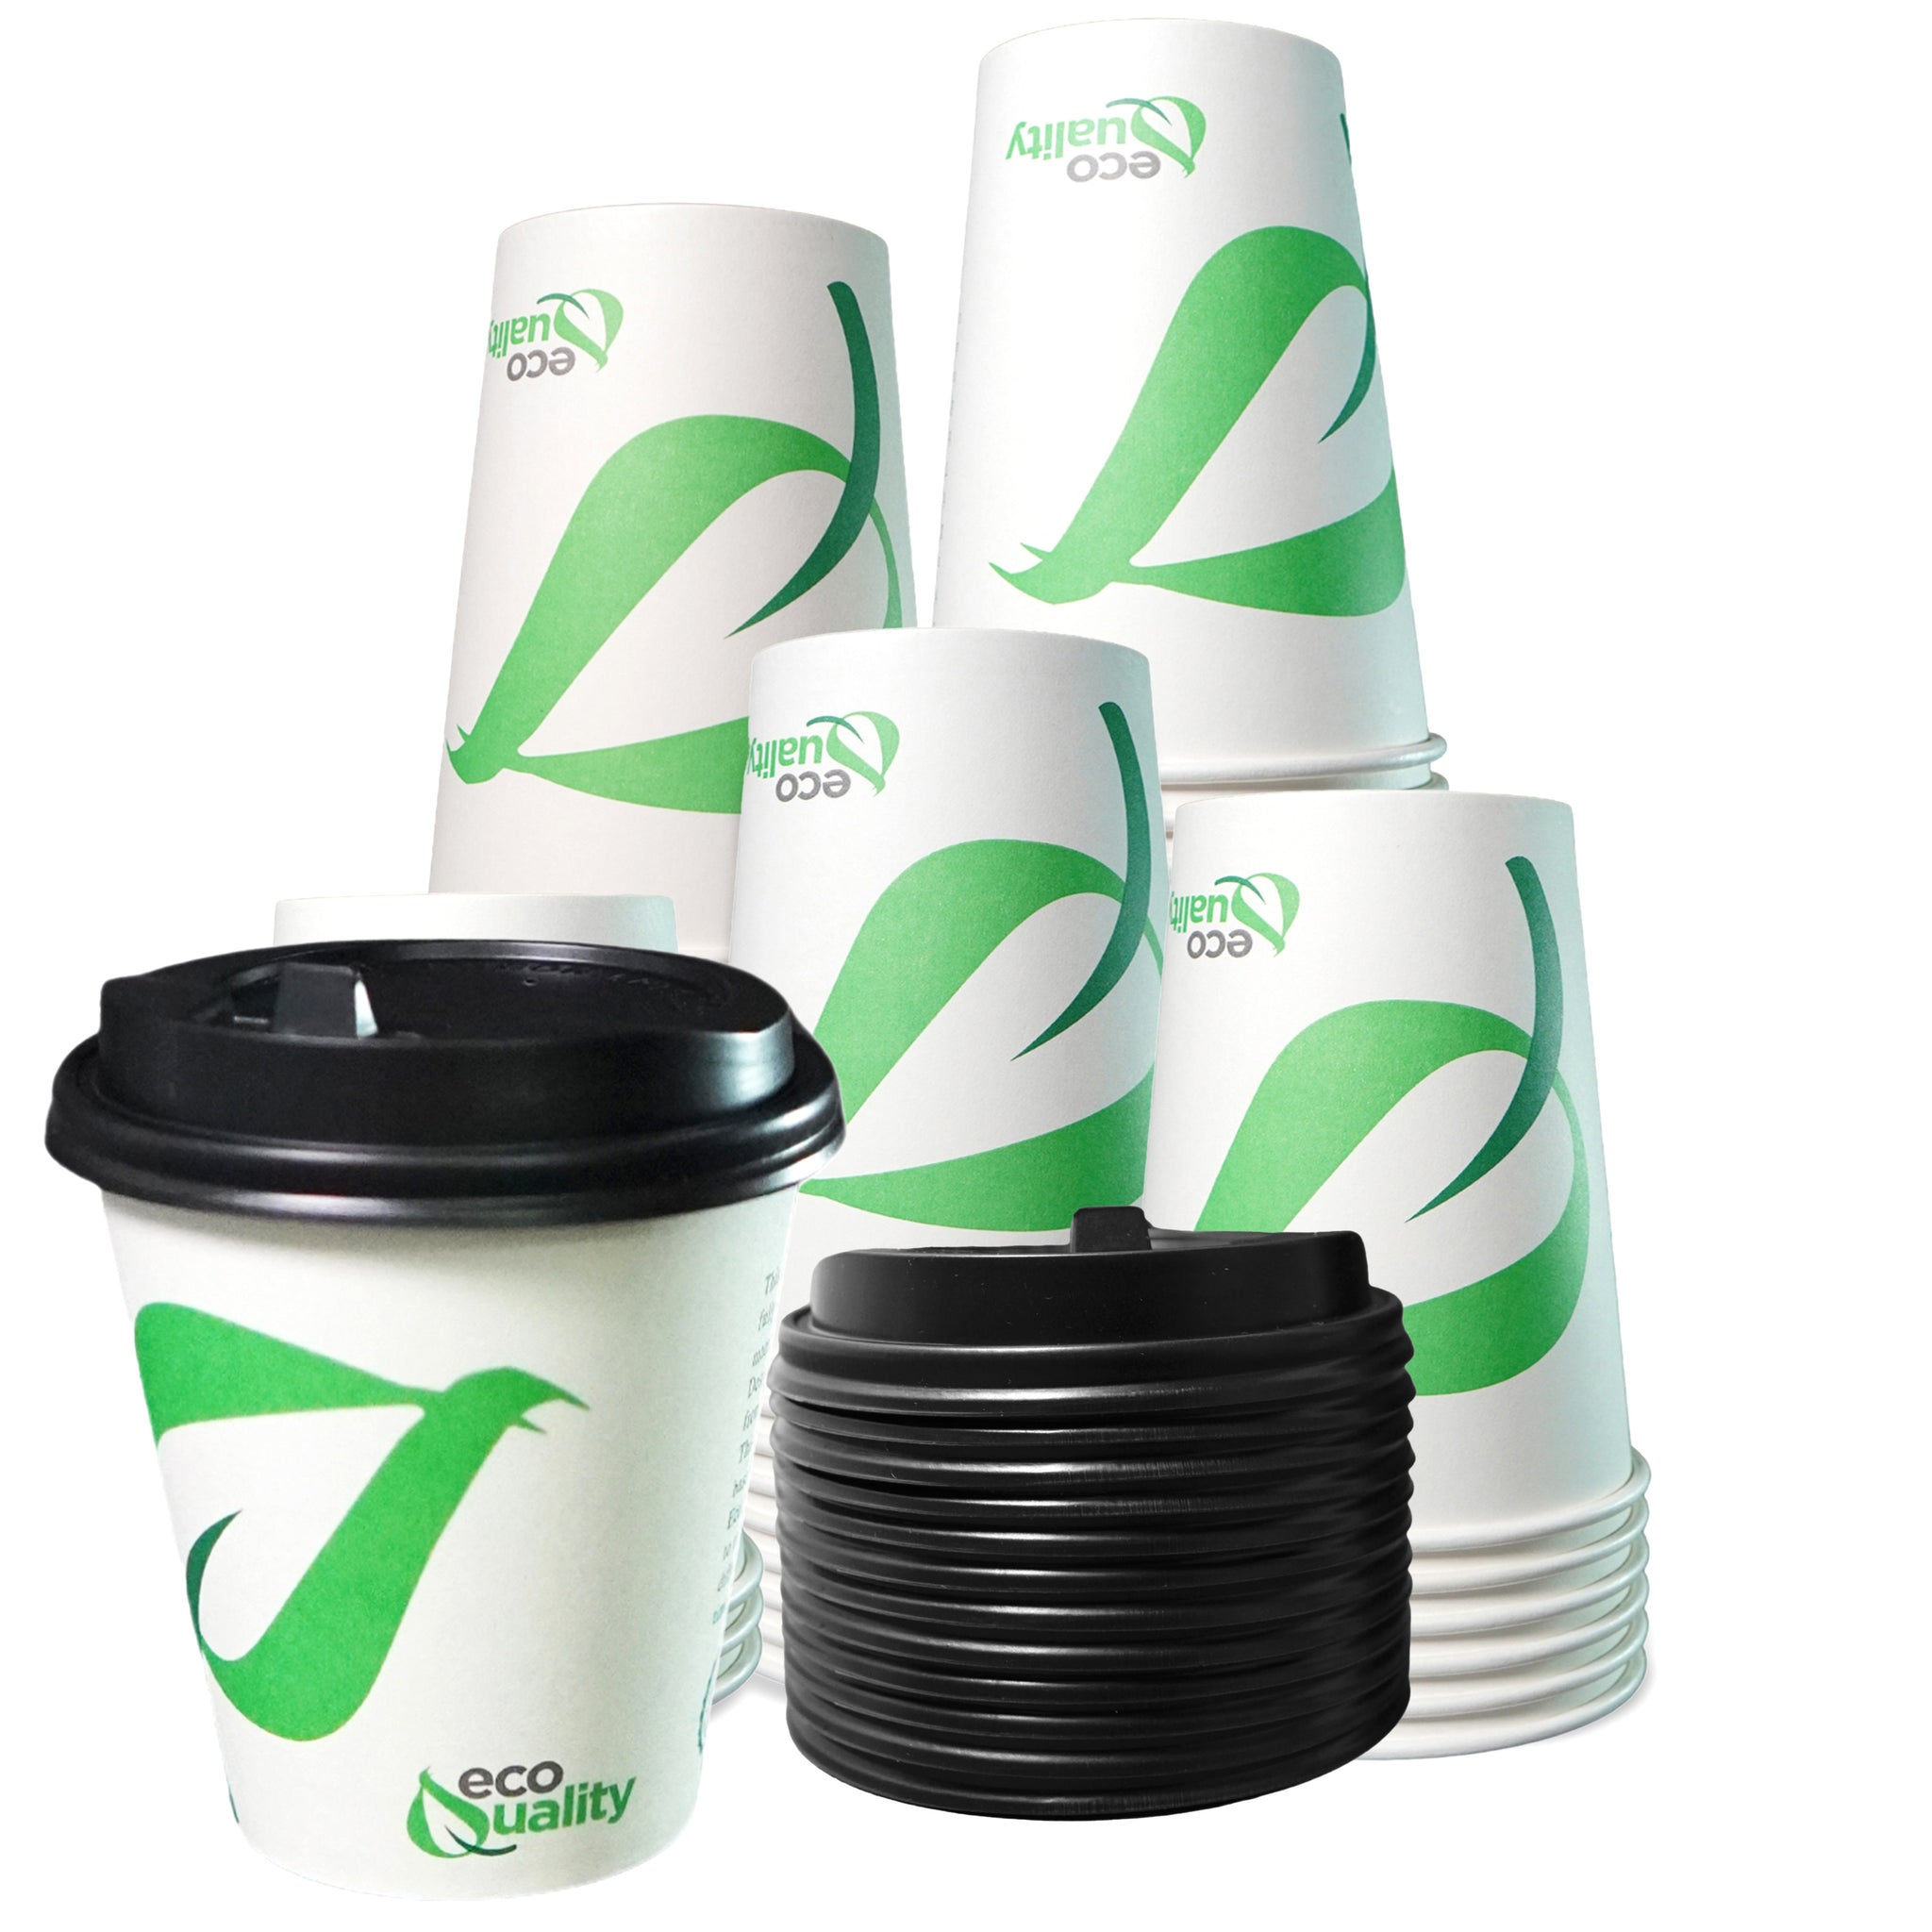 10oz Disposable Compostable Biodegradable White Paper Coffee Cups with Black Dome